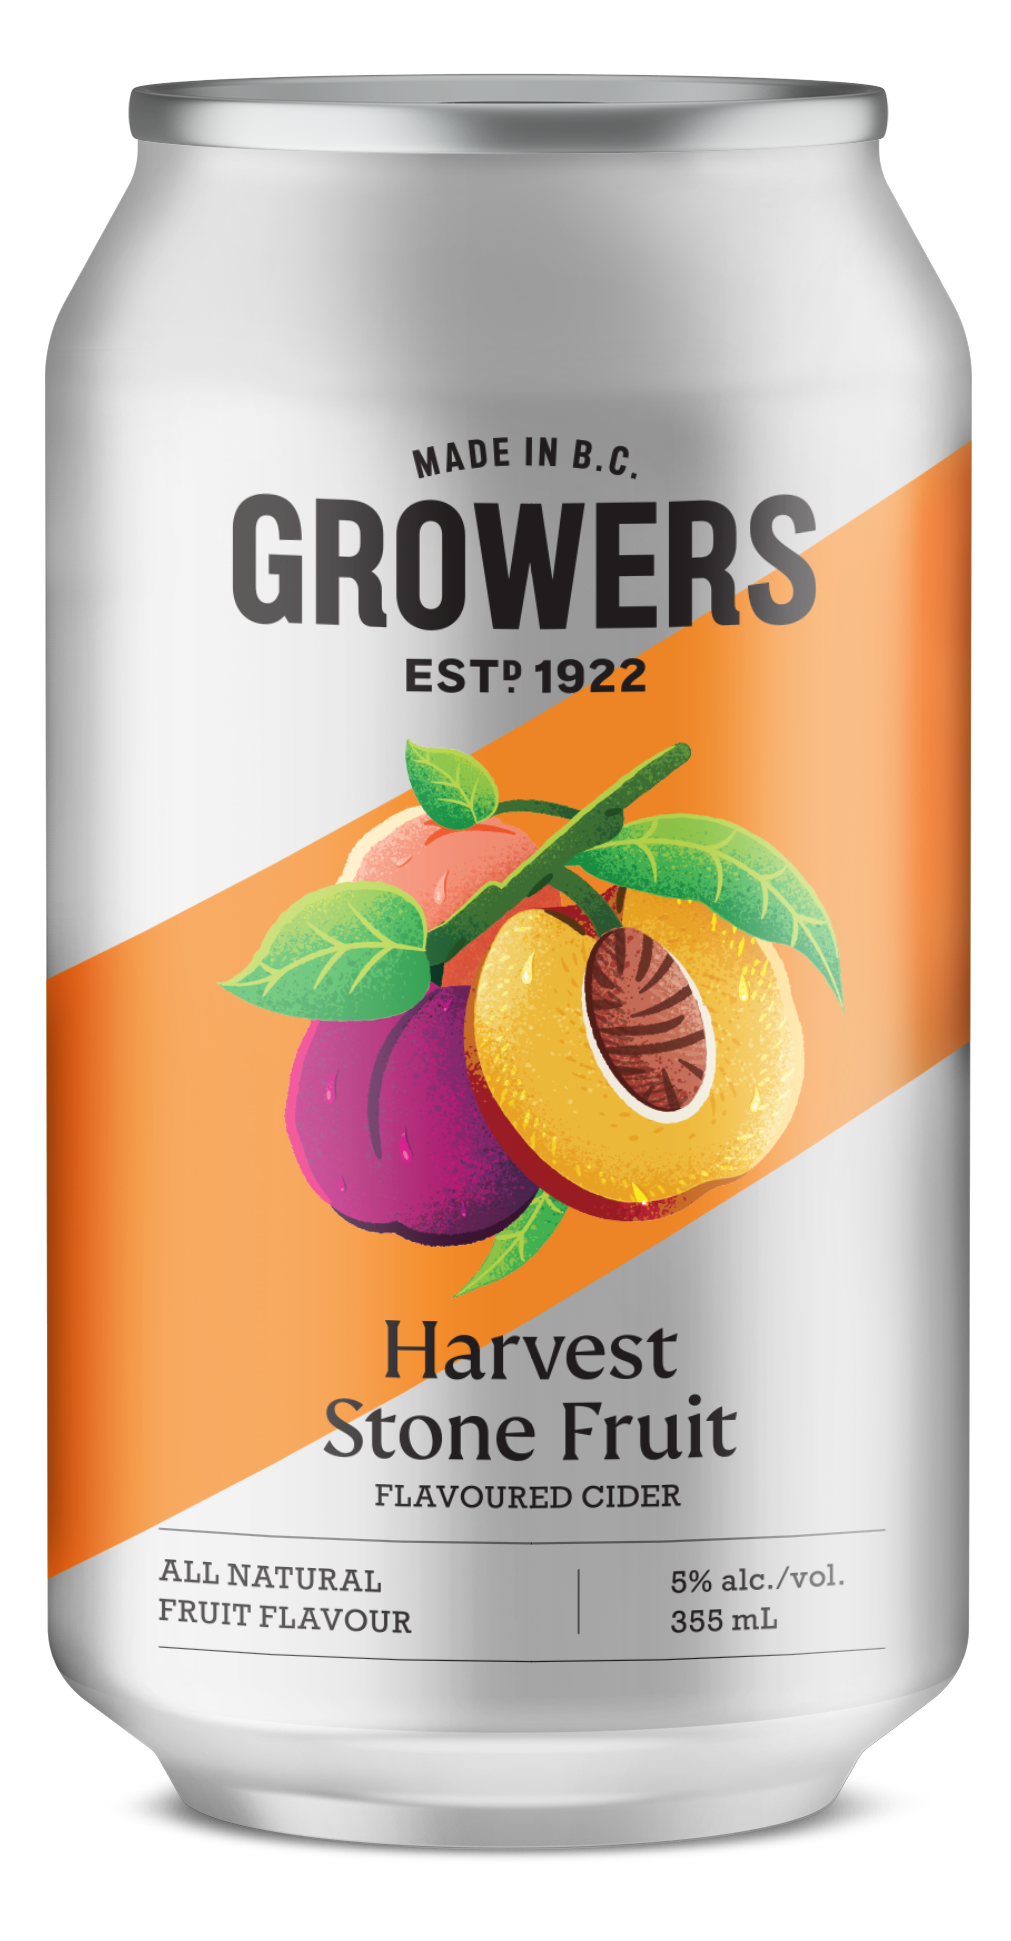 Can of Growers Harvest Stone Fruit cider